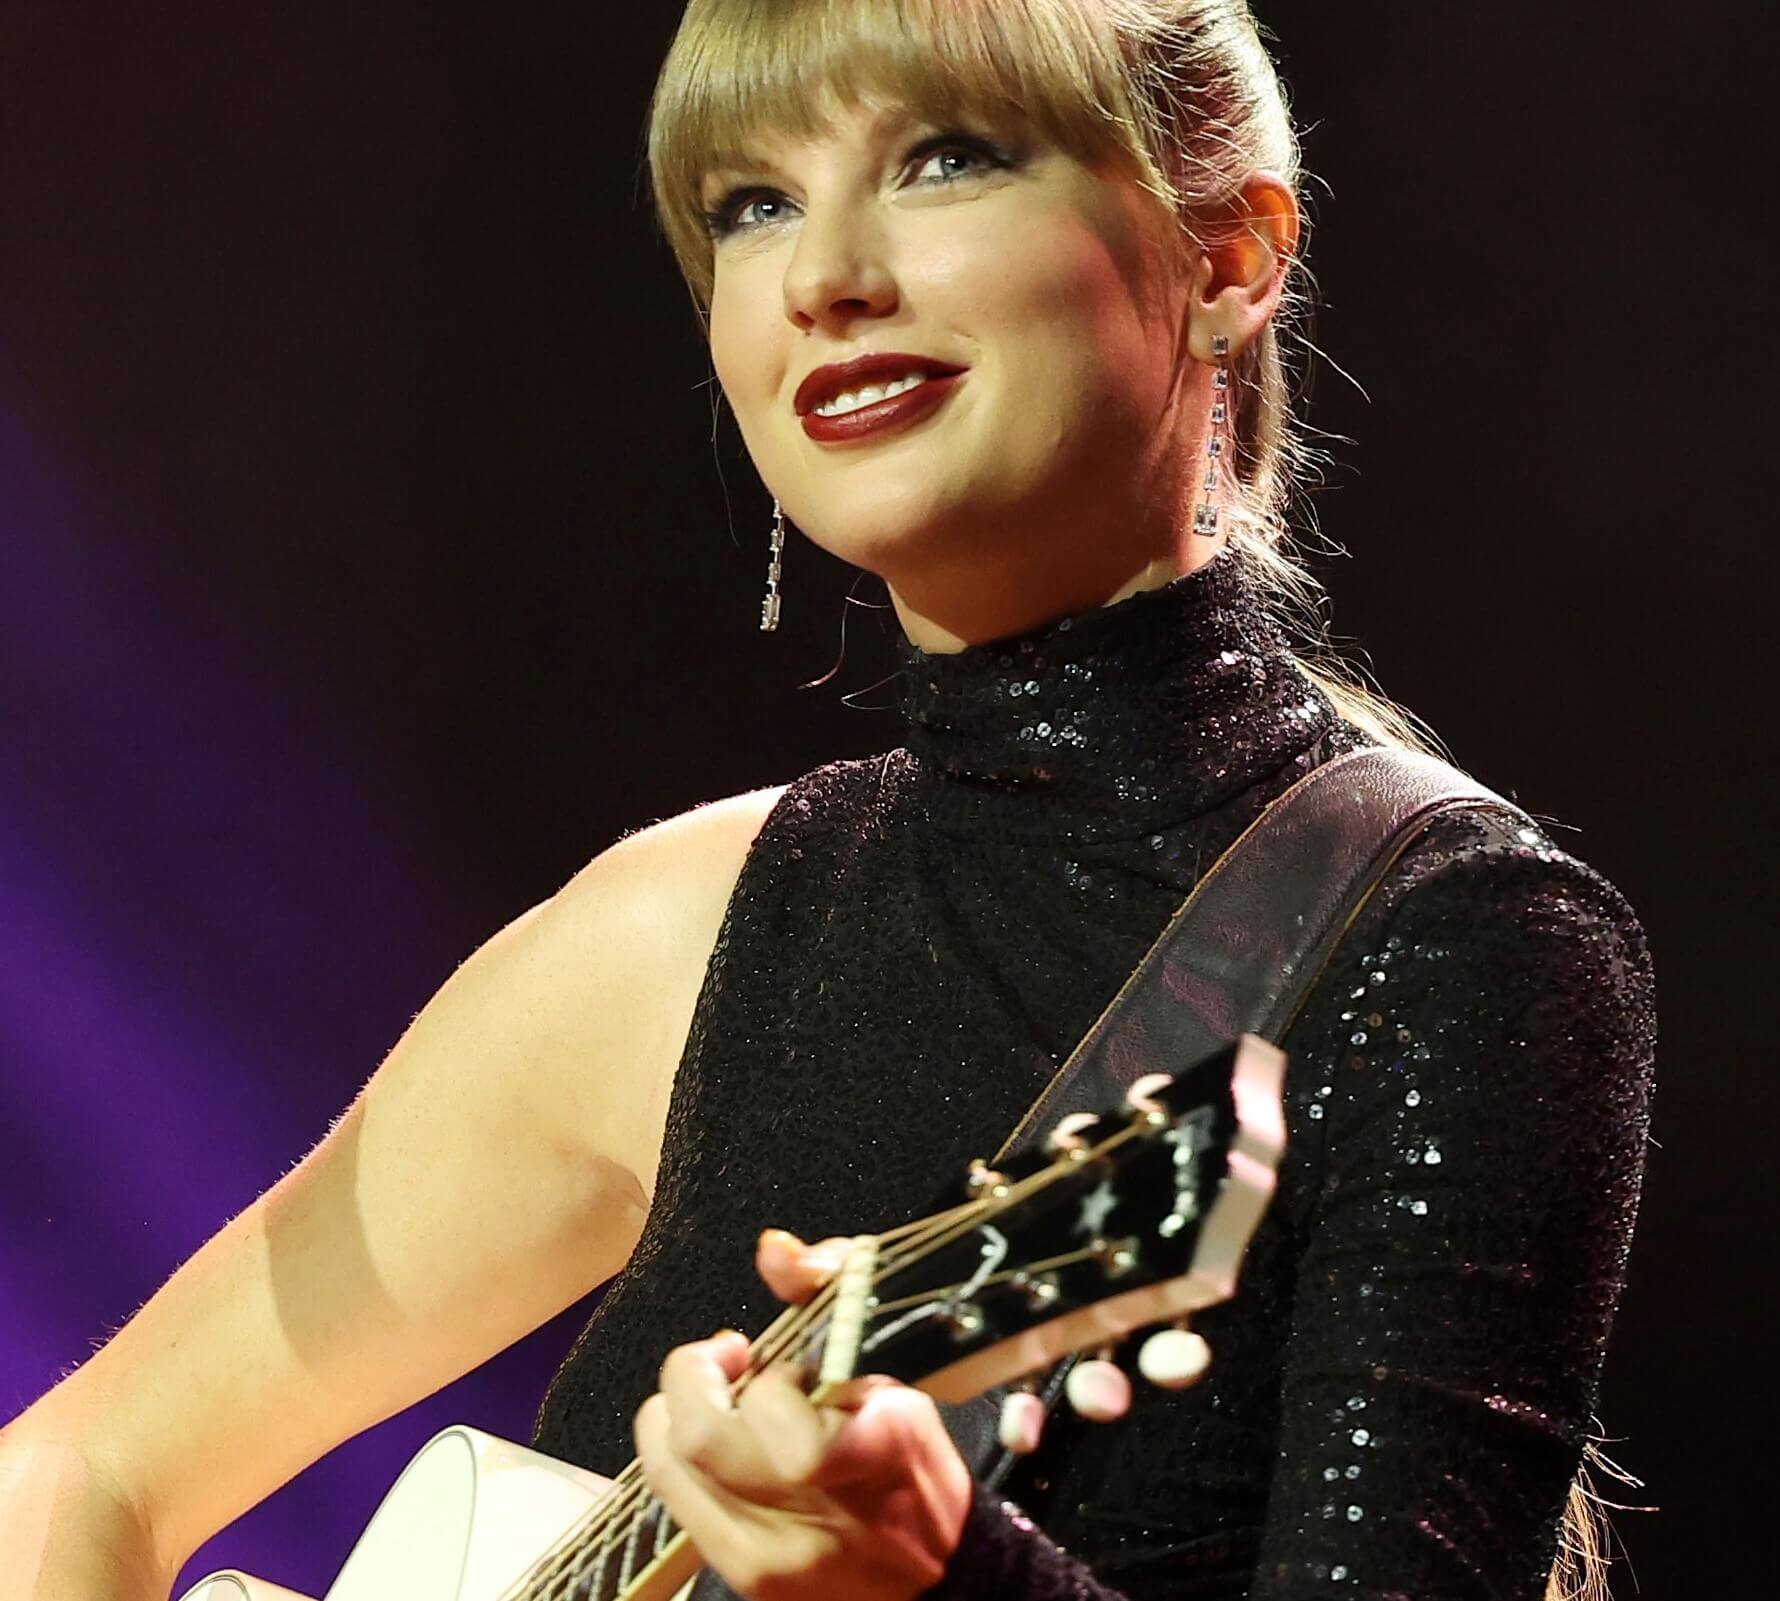 Taylor Swift with a guitar